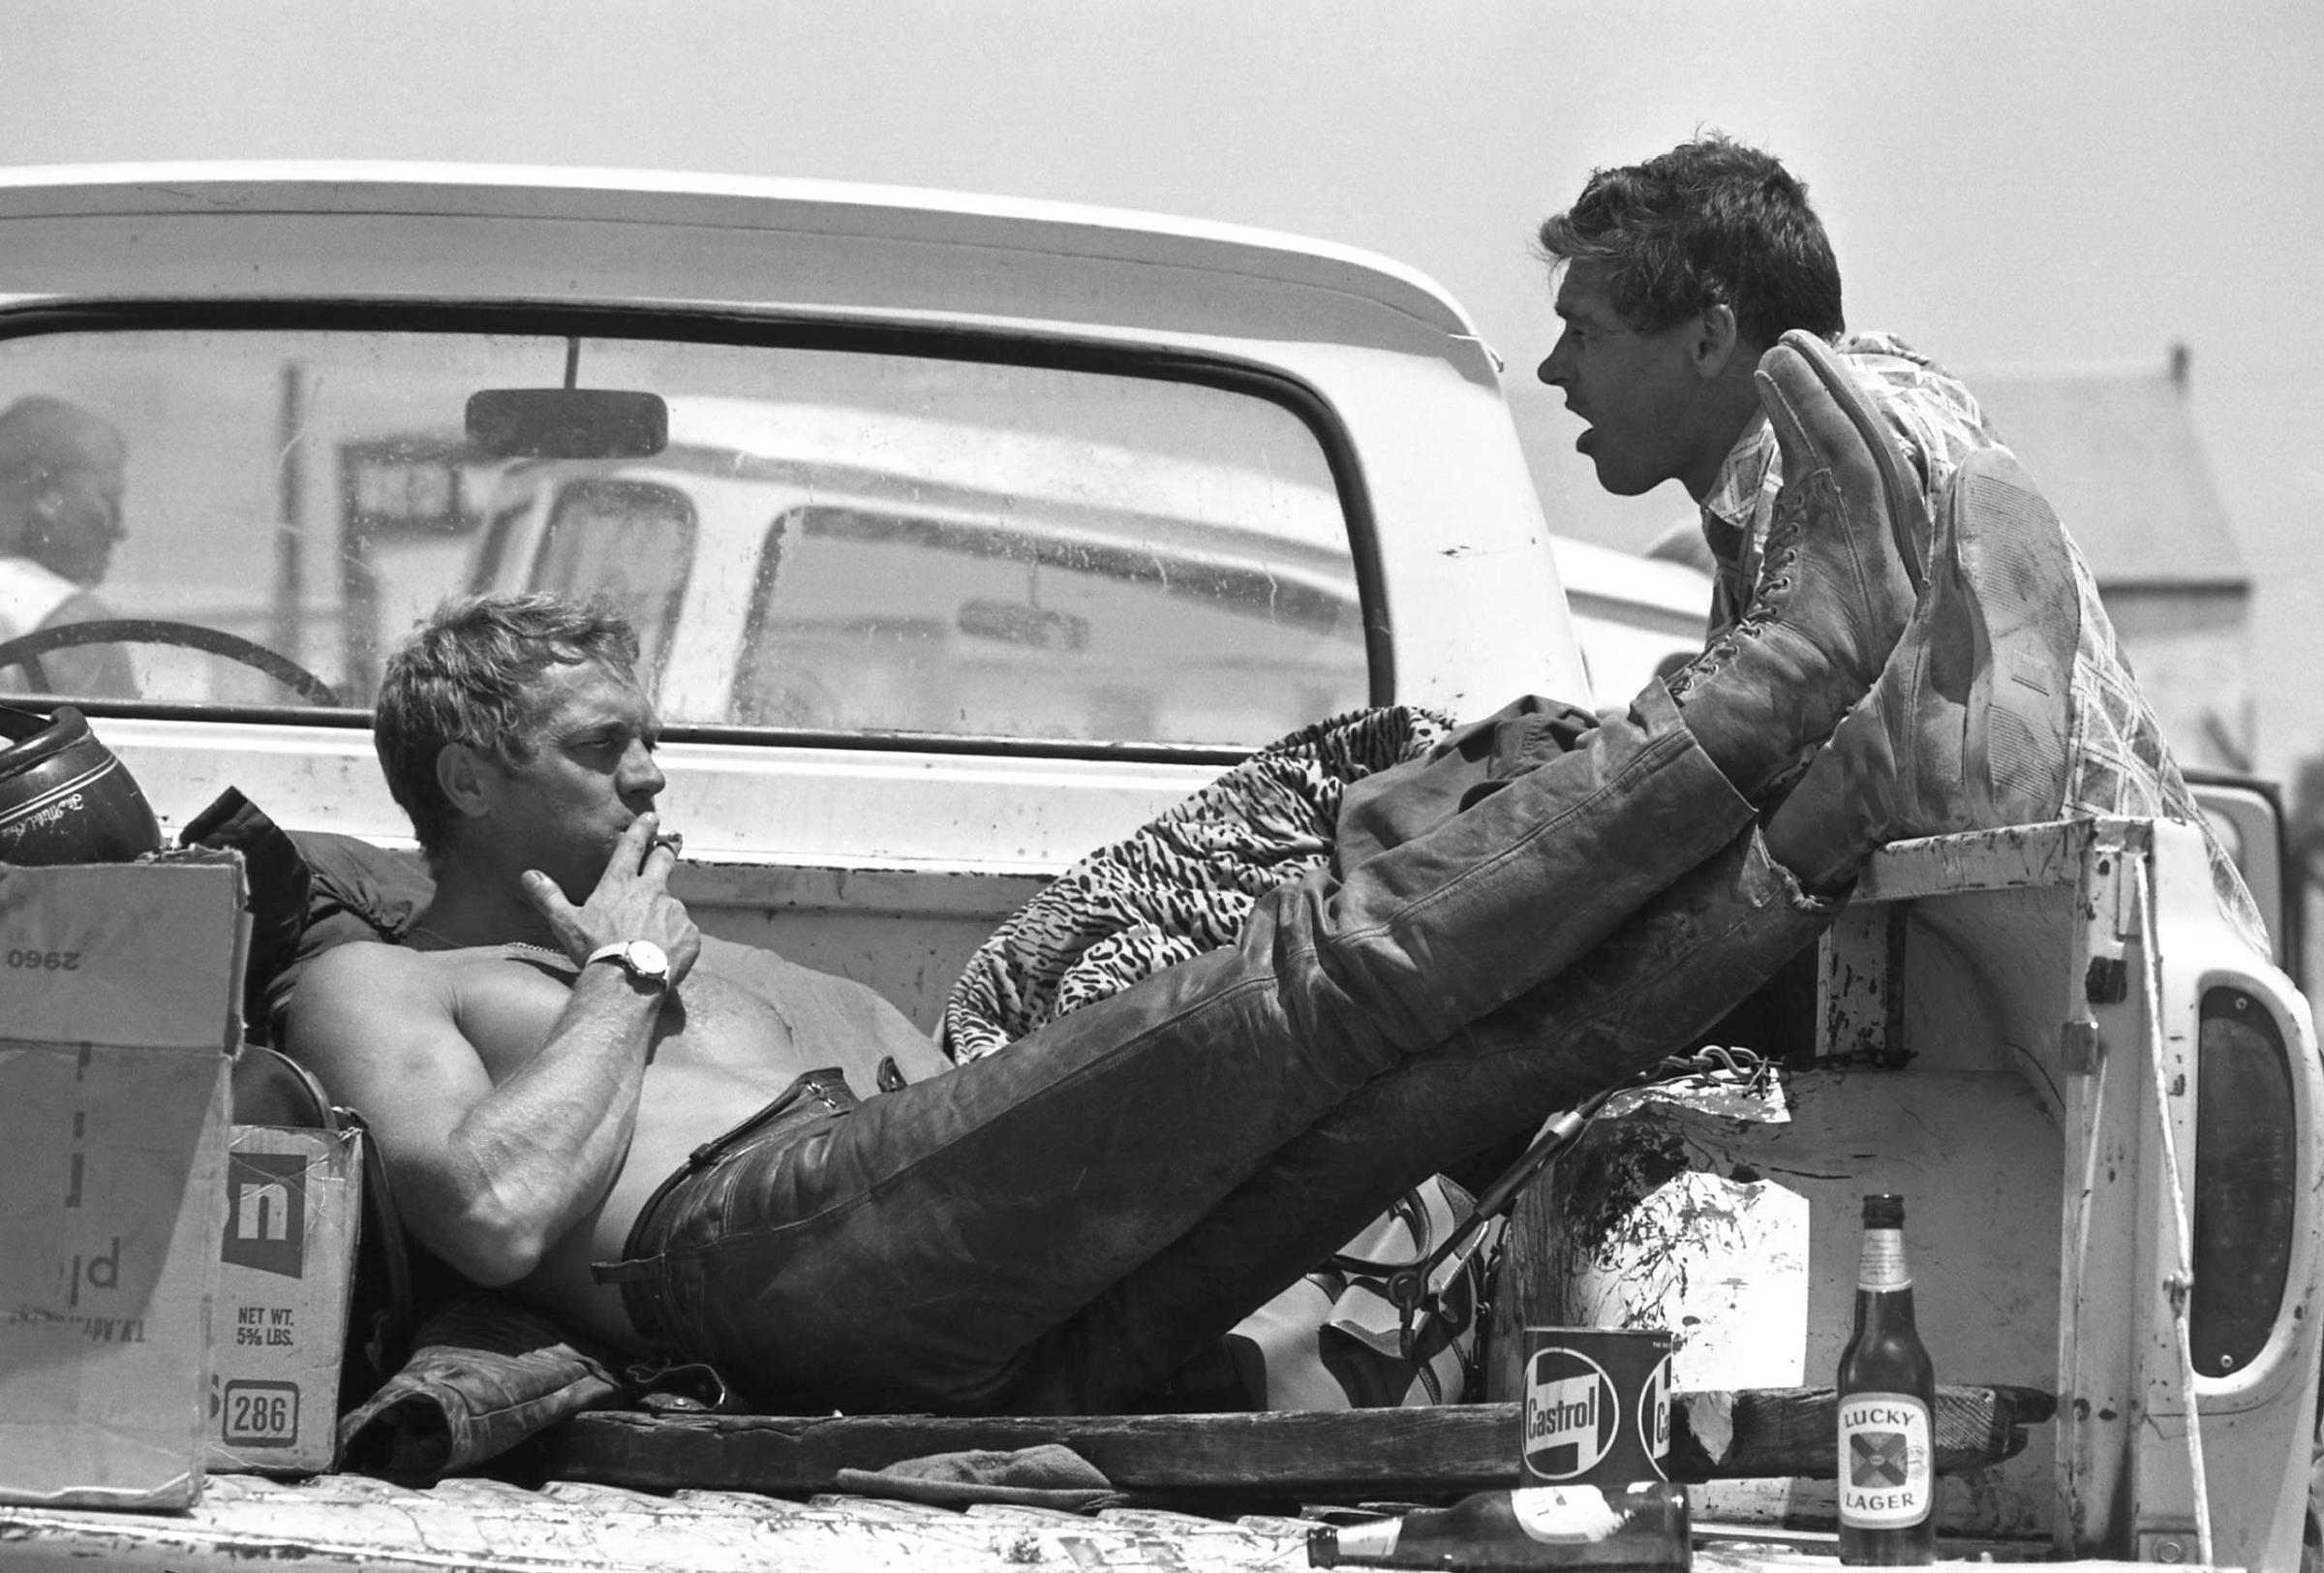 Steve McQueen takes a lunch break during a motorcycle race with Bud Ekins, his friend and stuntman for The Great Escape, 1963.